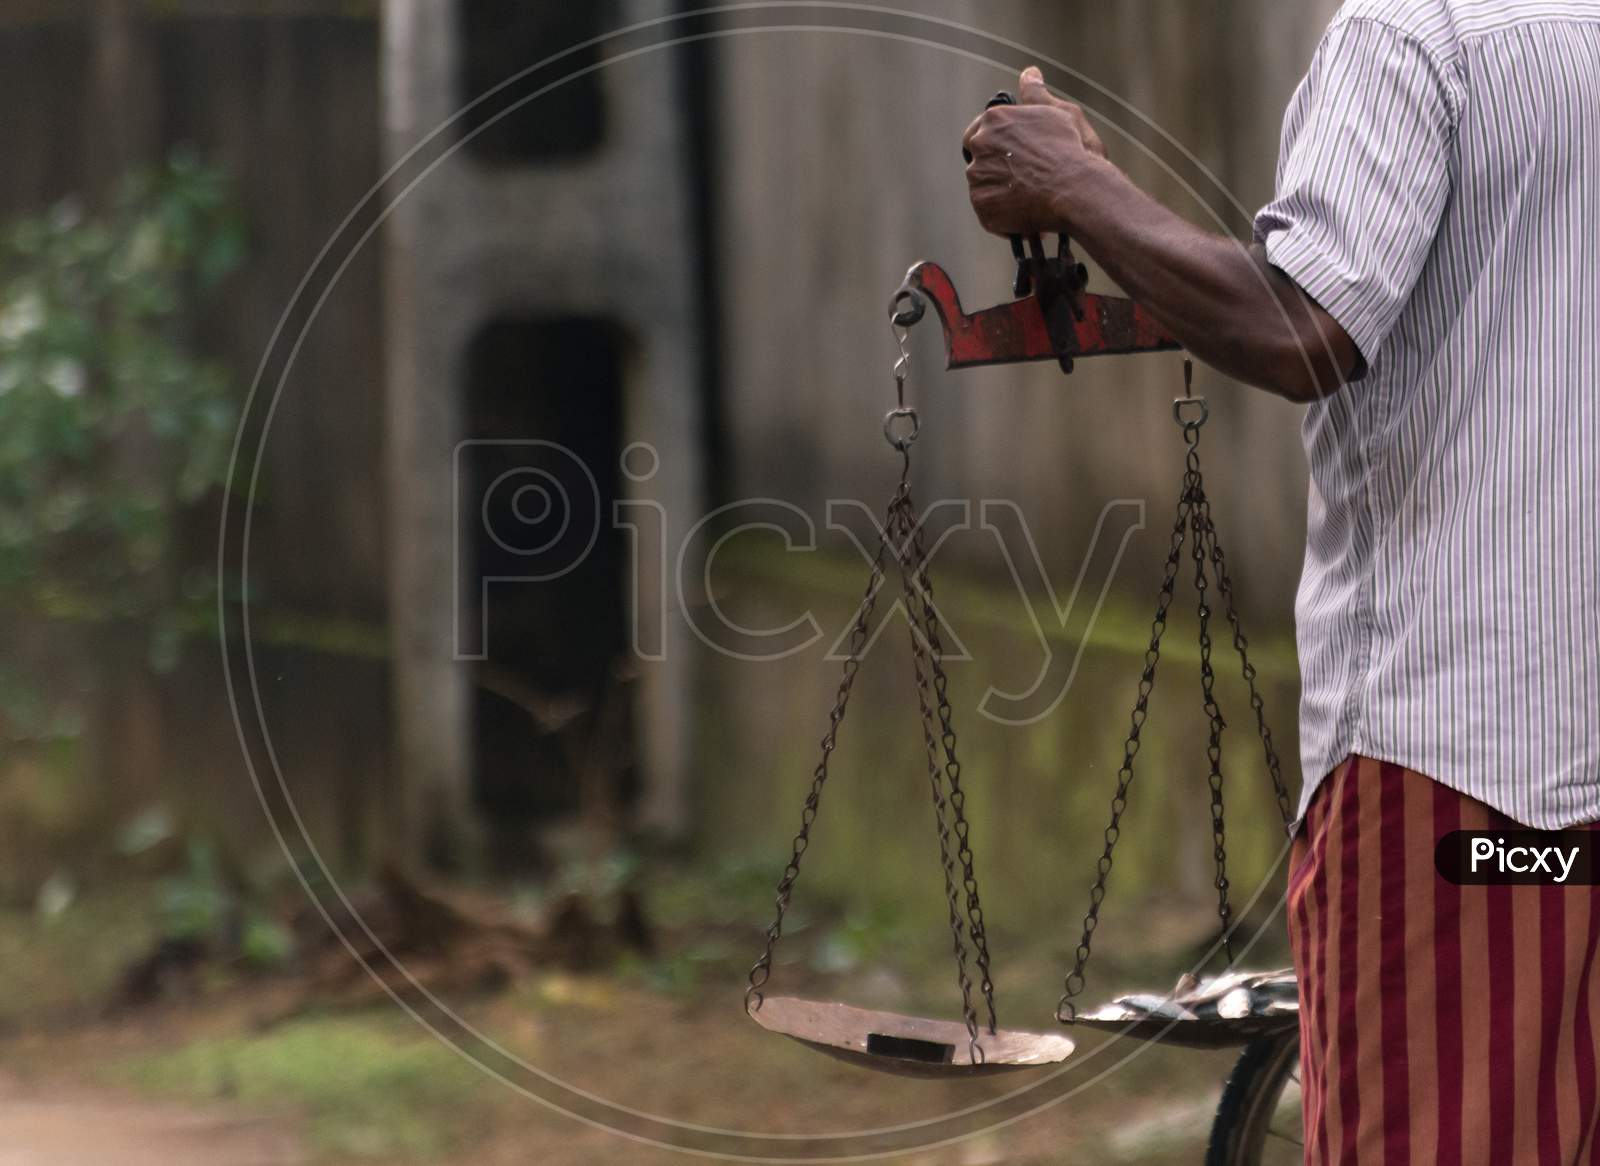 Fishermen Hand Holding A Scale, Balancing Fish And The Weight Close Up Photo, The Typical Way Of Measuring The Weight Of Fish In Major Parts Of Sri Lanka.